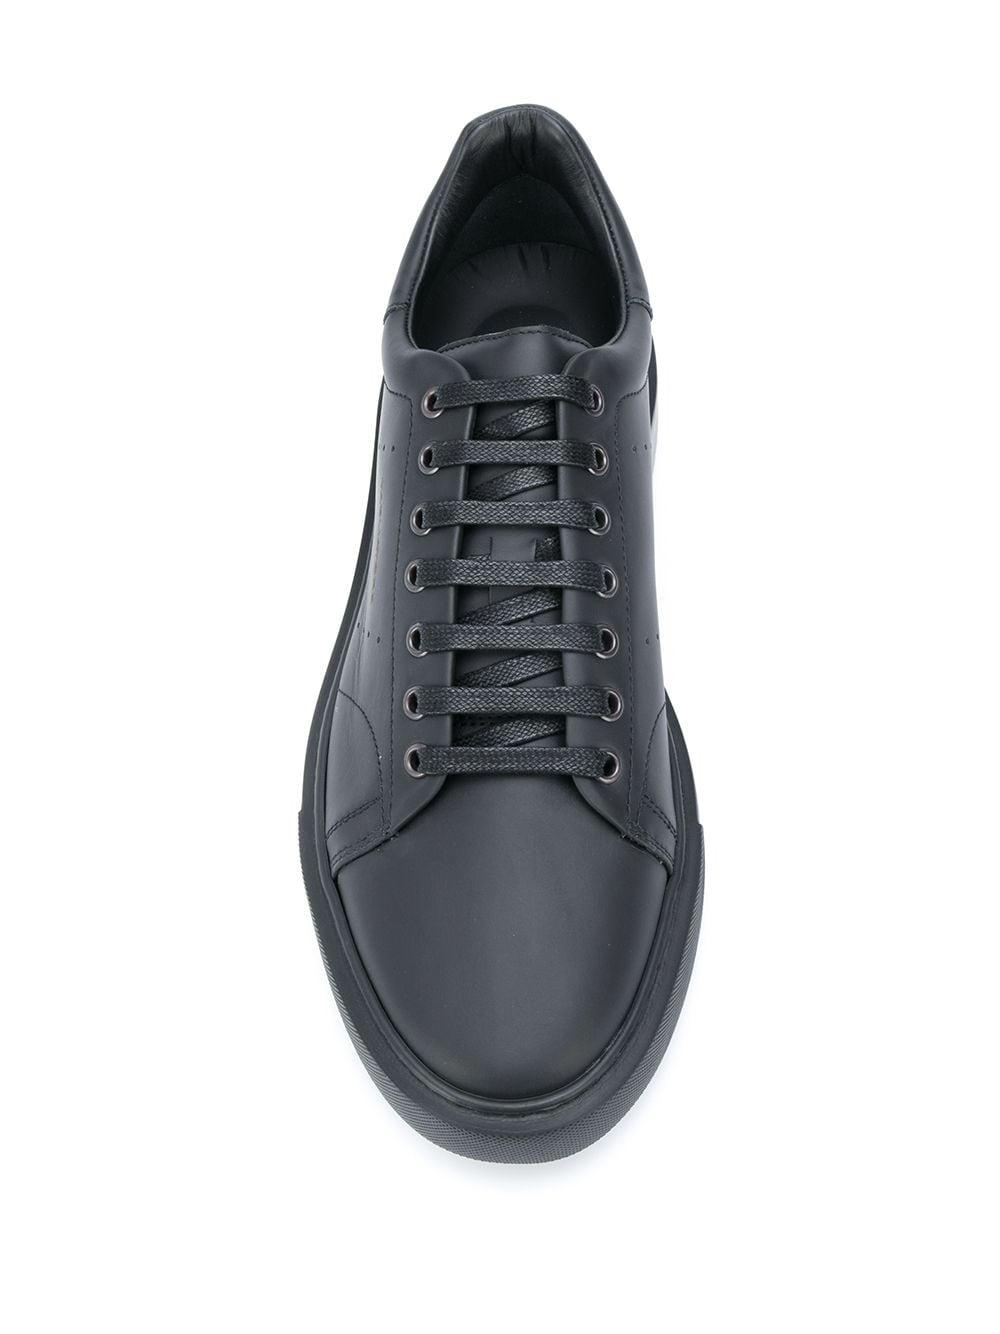 Tagliatore Leather Wade Low-top Sneakers in Black for Men - Lyst